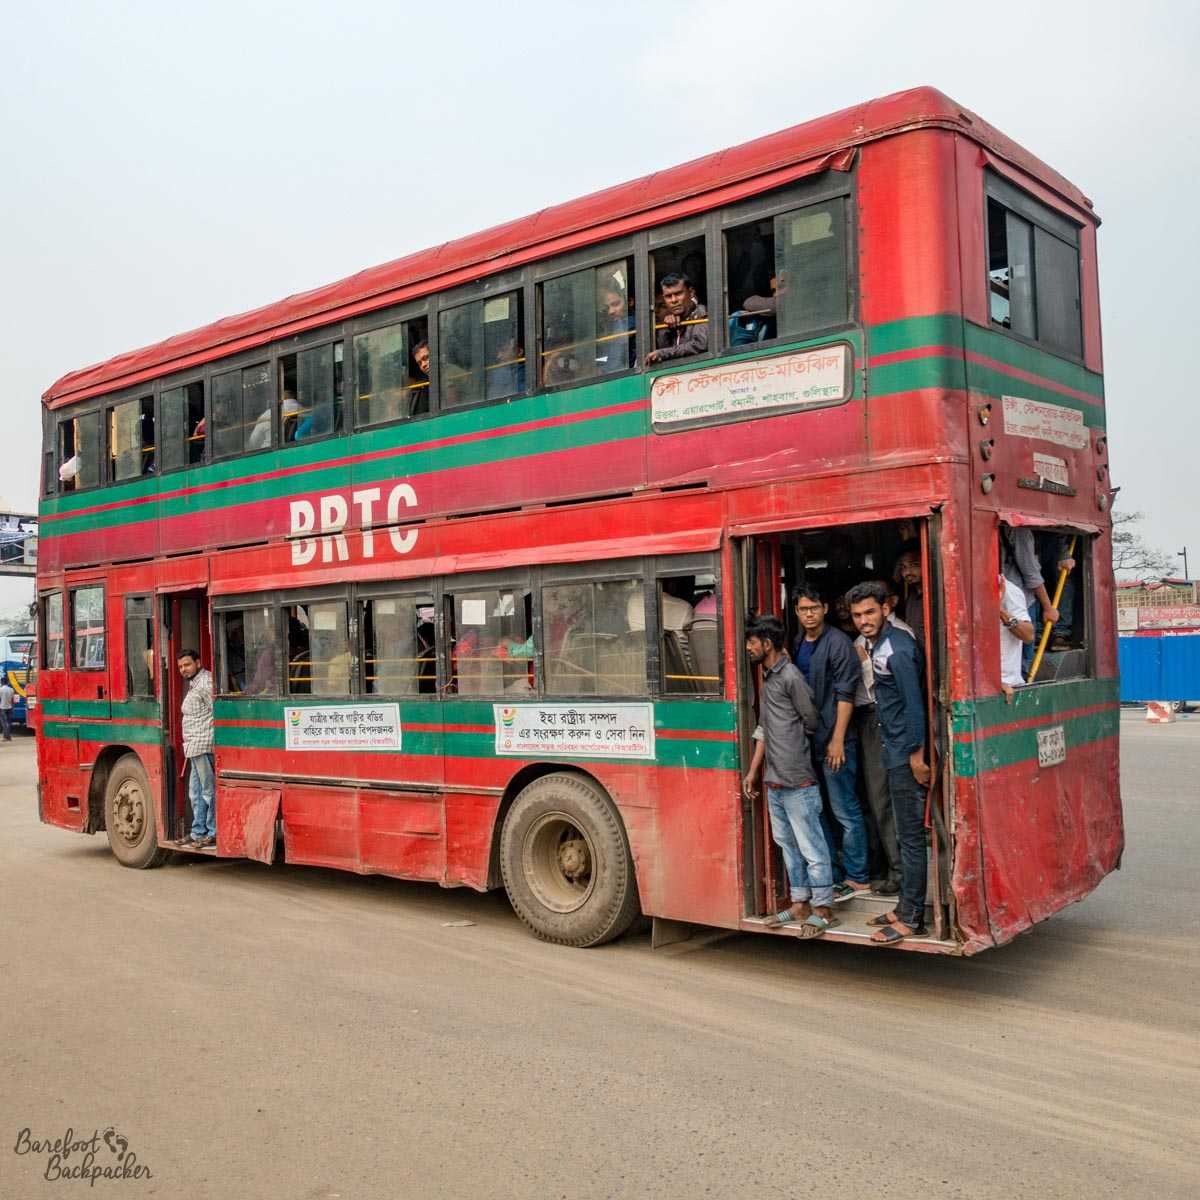 A typical bus in Dhaka – it's a red double-decker, it looks pretty old, and it's completely full to the extent that there are people just standing at the open door at the rear. They are not waiting to get off.